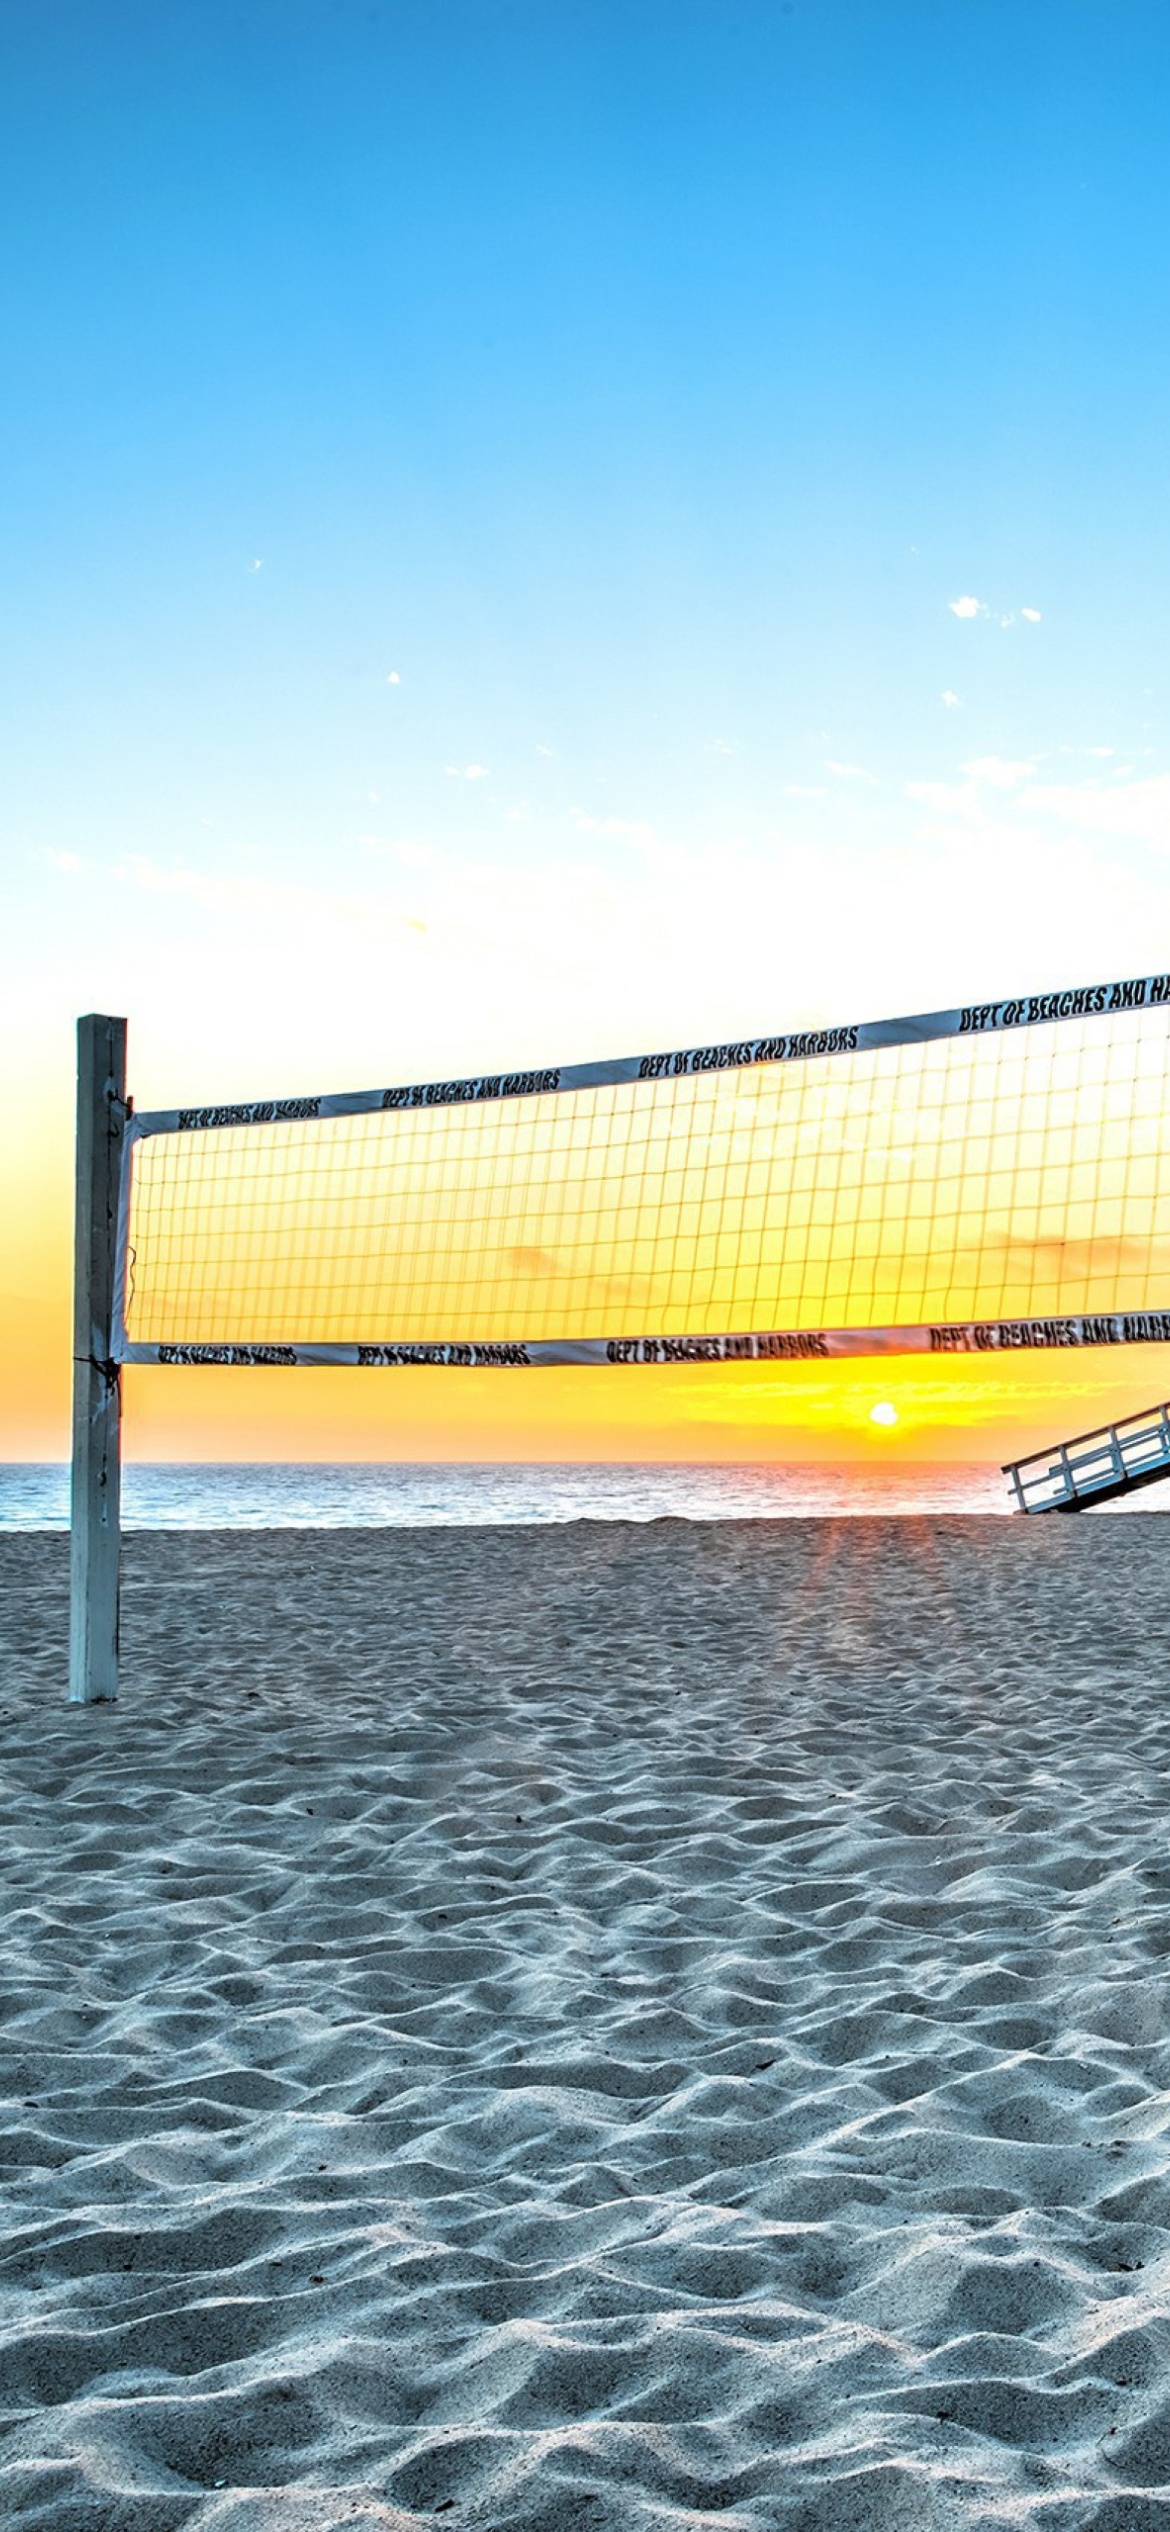 Download wallpaper 1350x2400 volleyball balls volleyball sports iphone  876s6 for parallax hd background